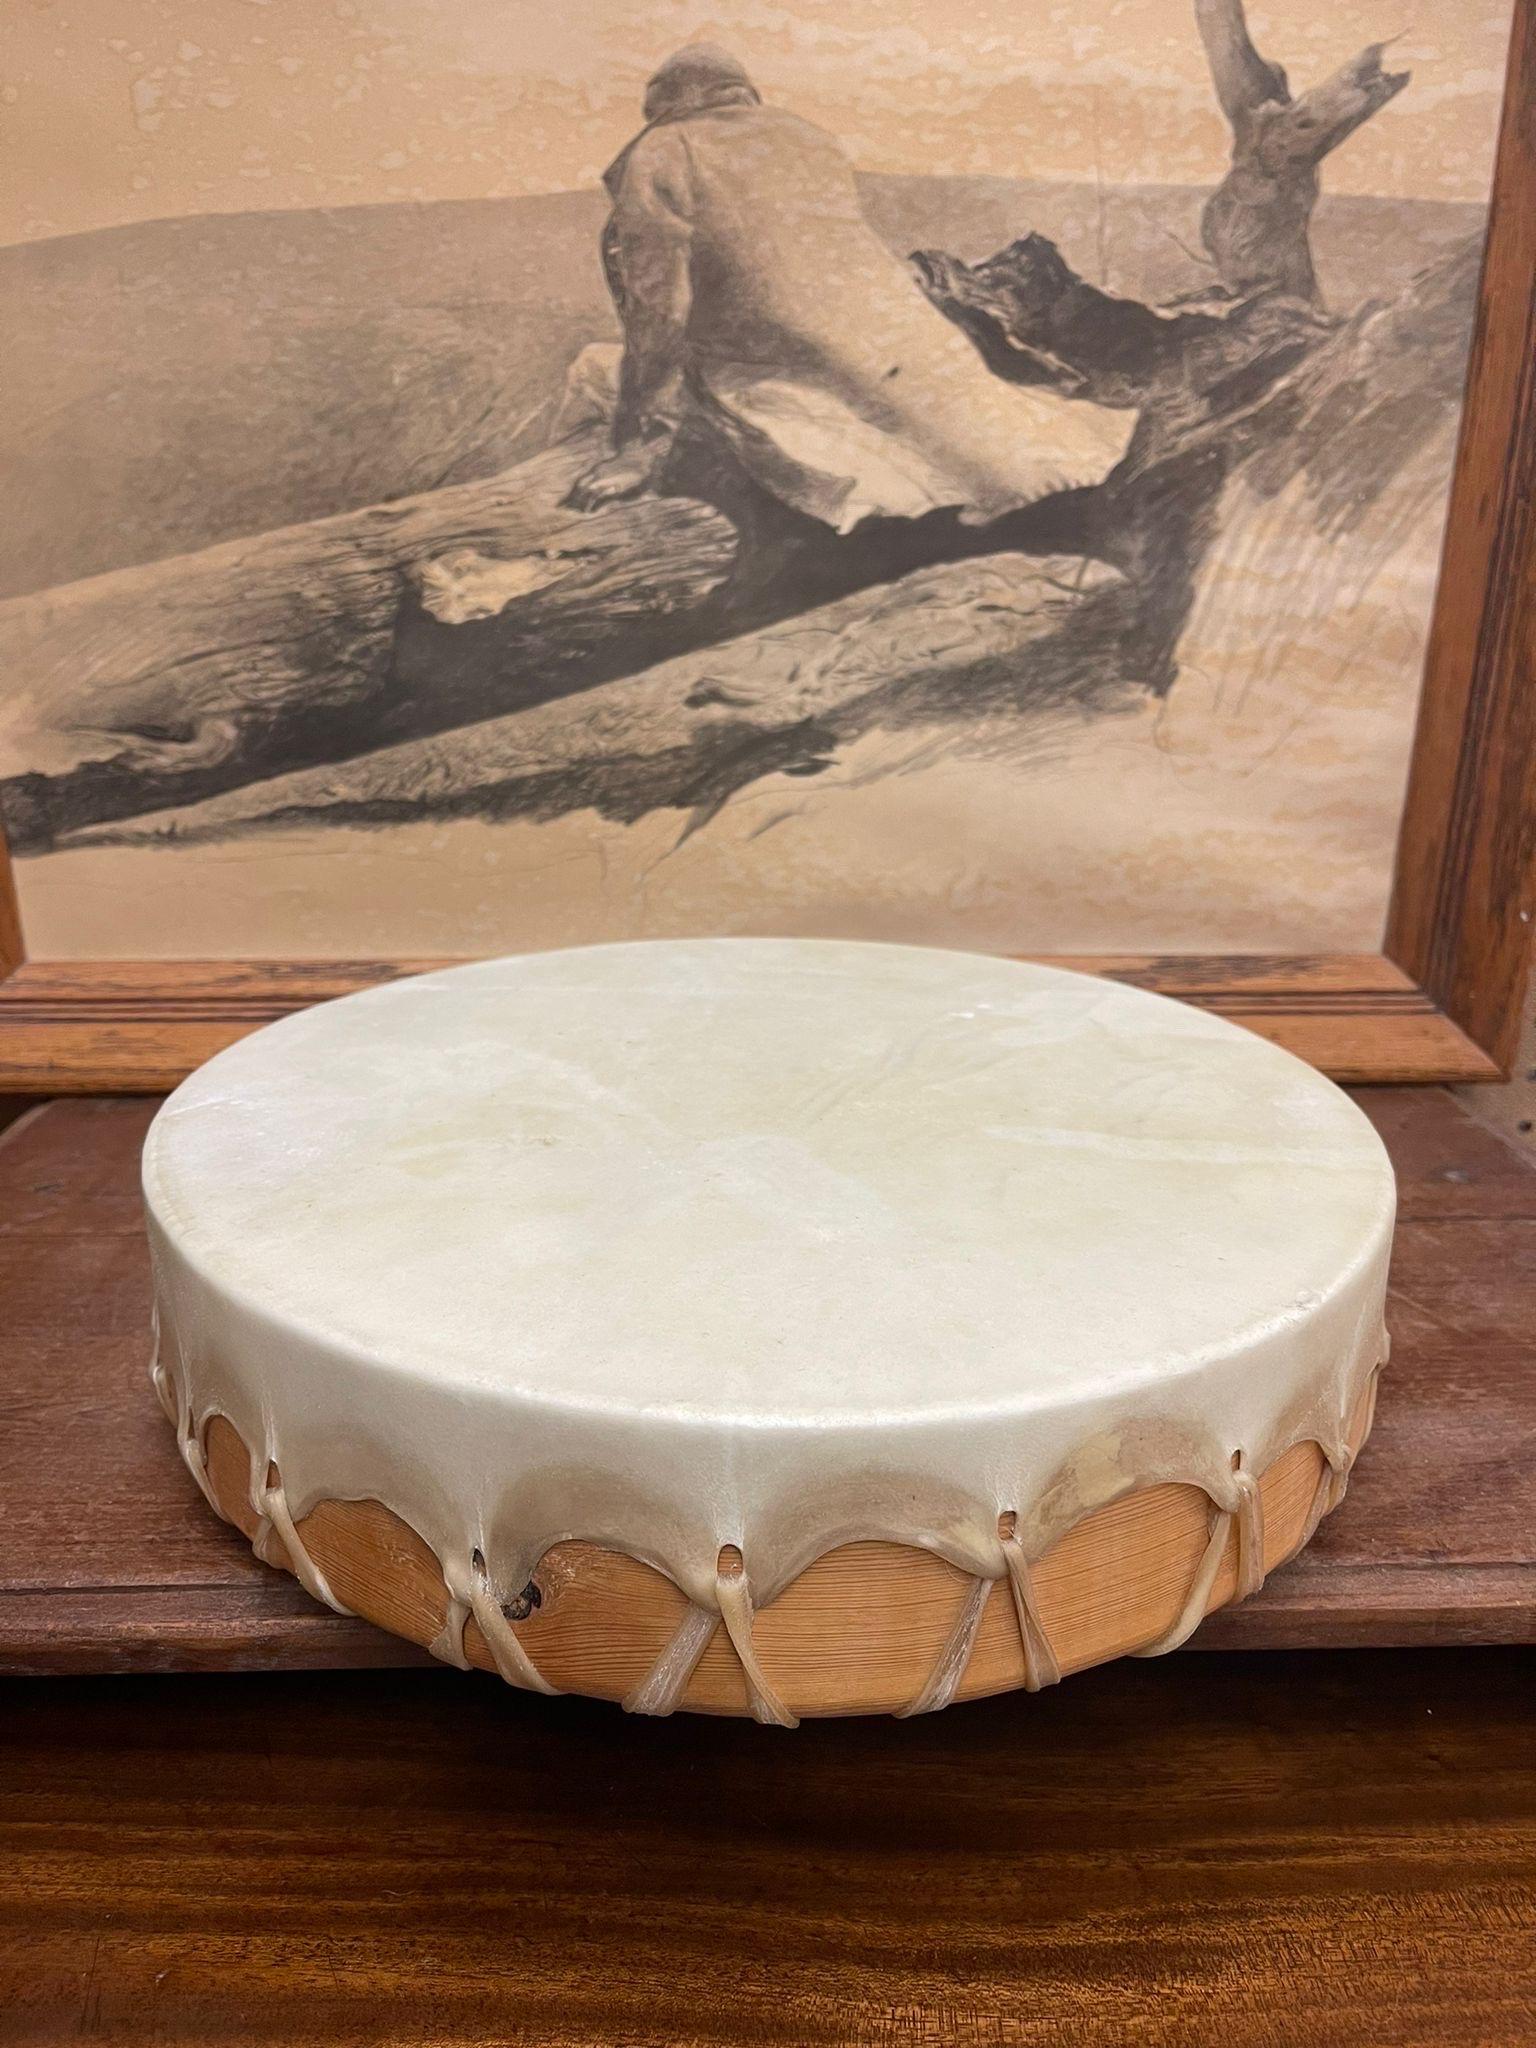 Possibly Rawhide as the Stretched Fabric on Top of Drum. Five Direction Handles. Intricate Knotting at the Bottom to Secure the Top Fabric.Possibly Native American Origin. Vintage Condition Consistent with Age as Pictured.

Dimensions. 14 Diameter;